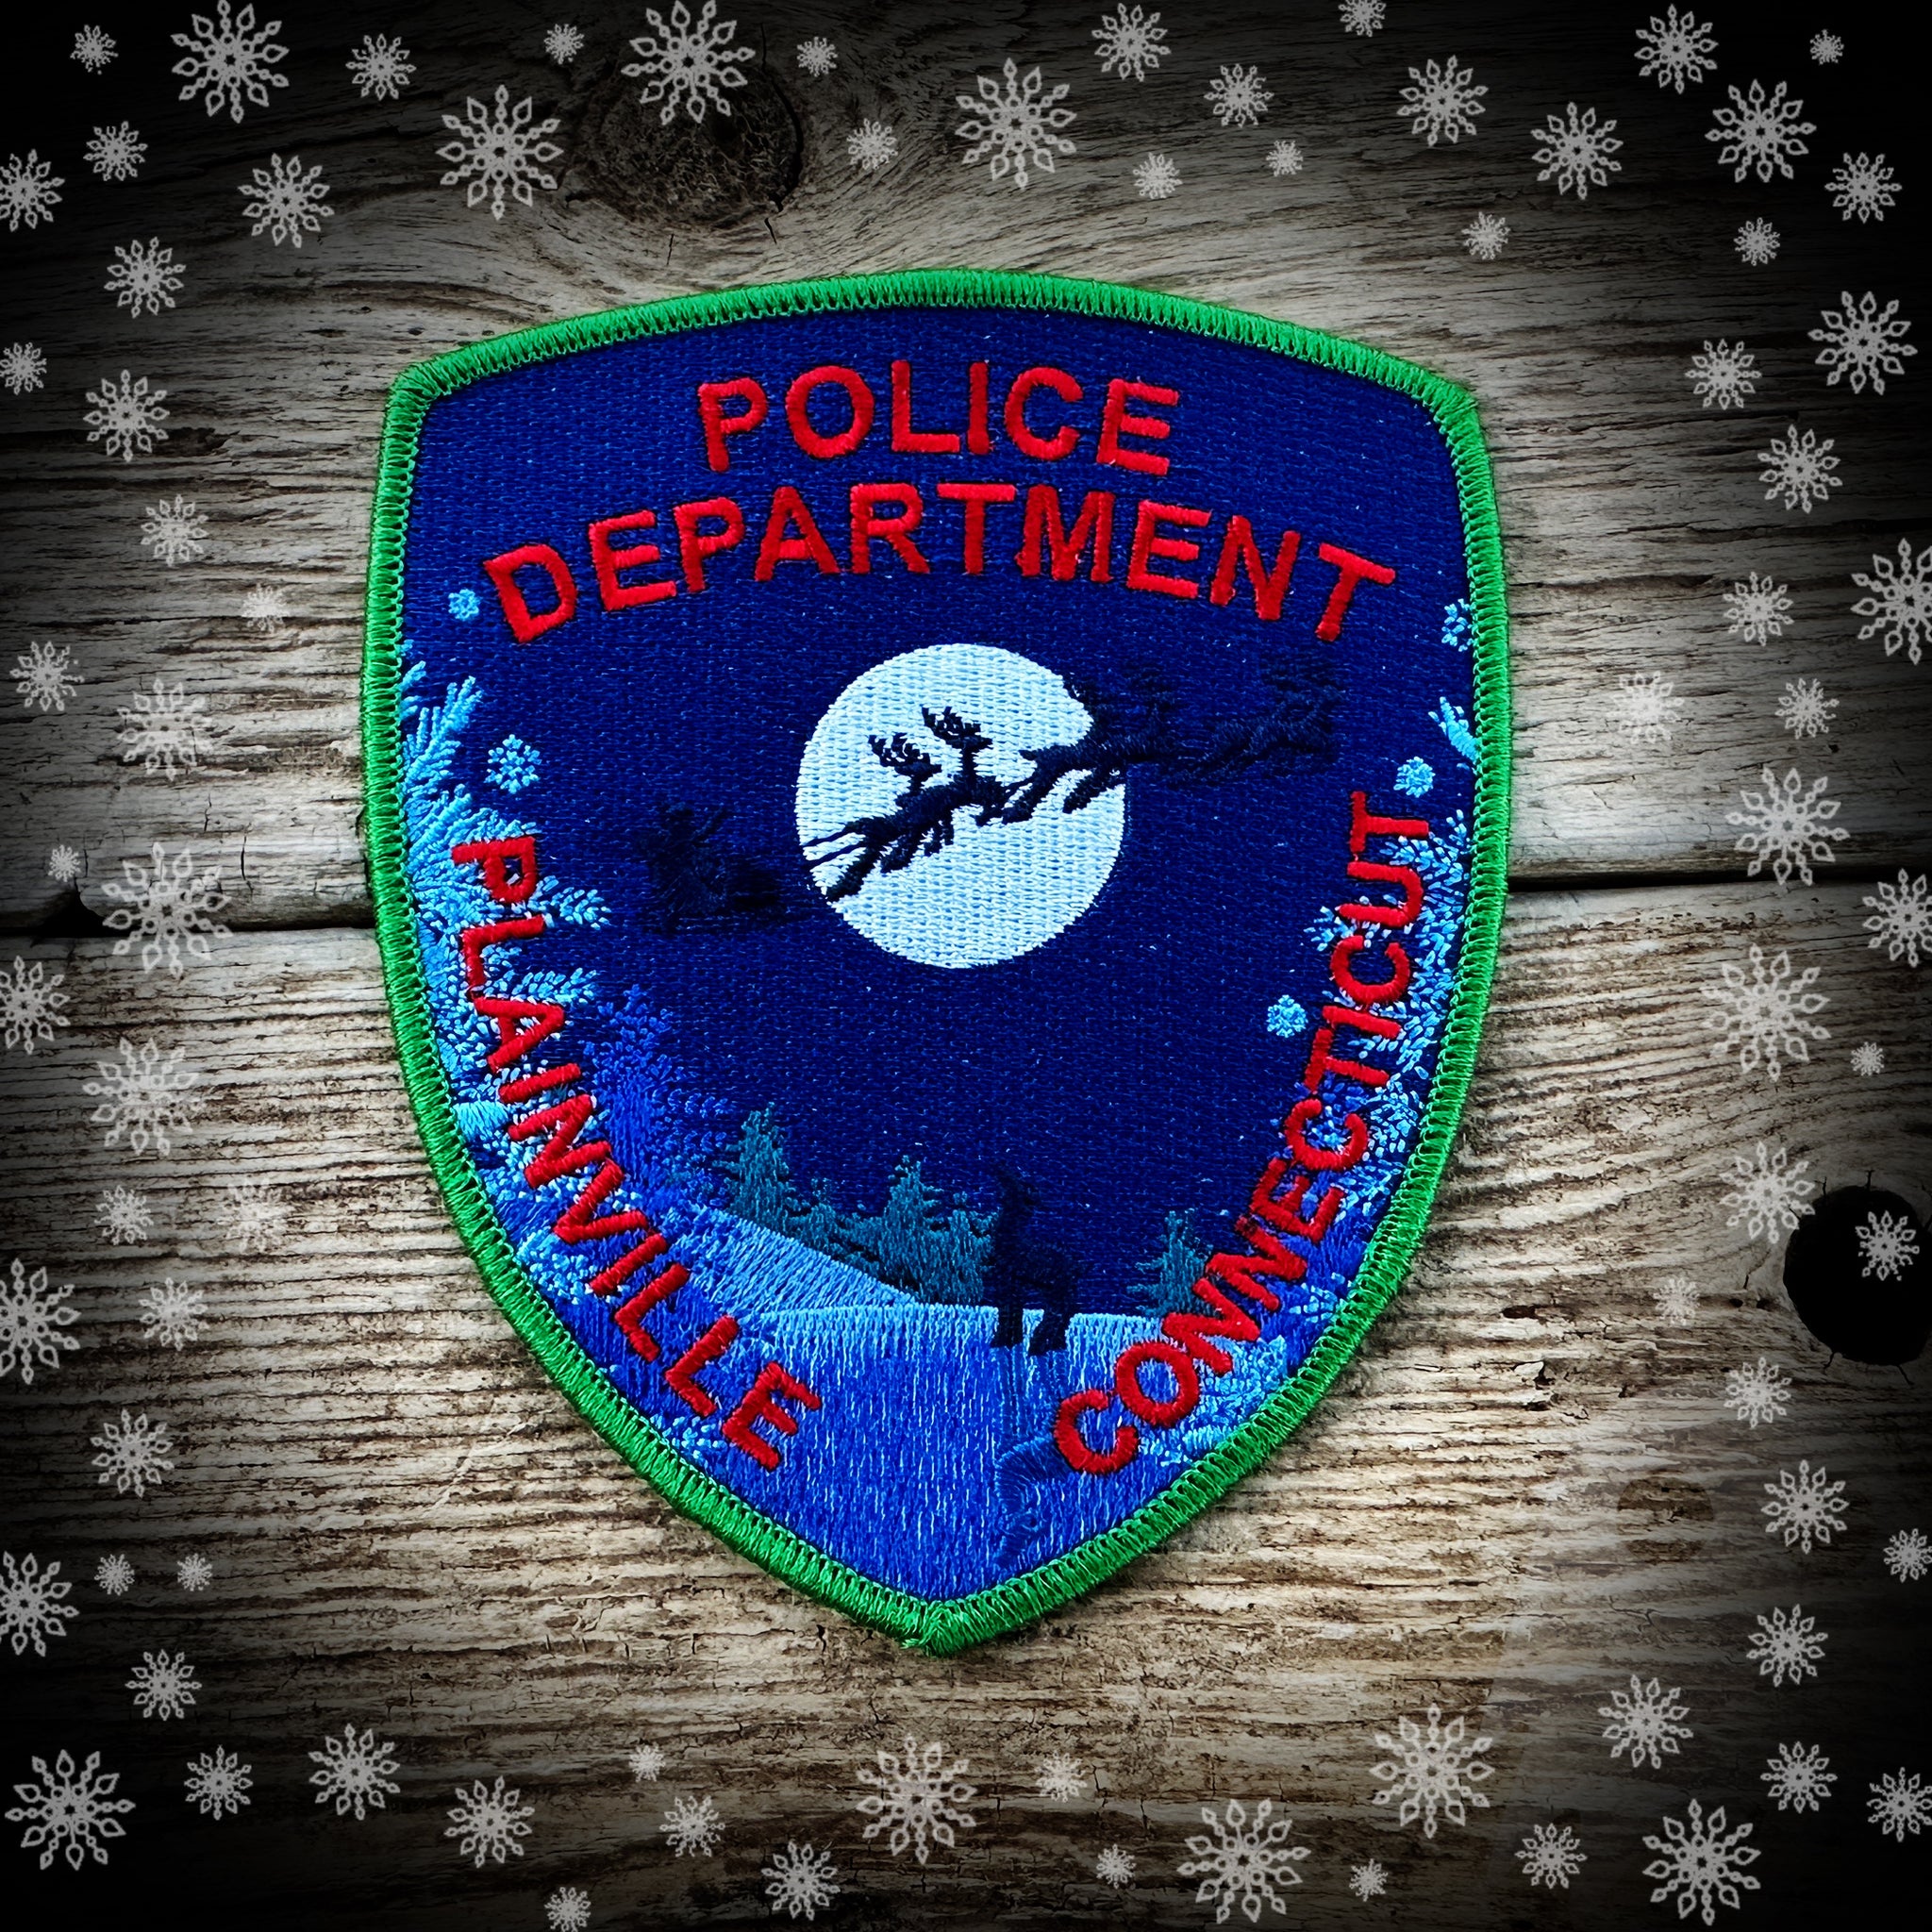 Plainville, CT PD 2022 Christmas Patch - Authentic and limited! HO HO HO